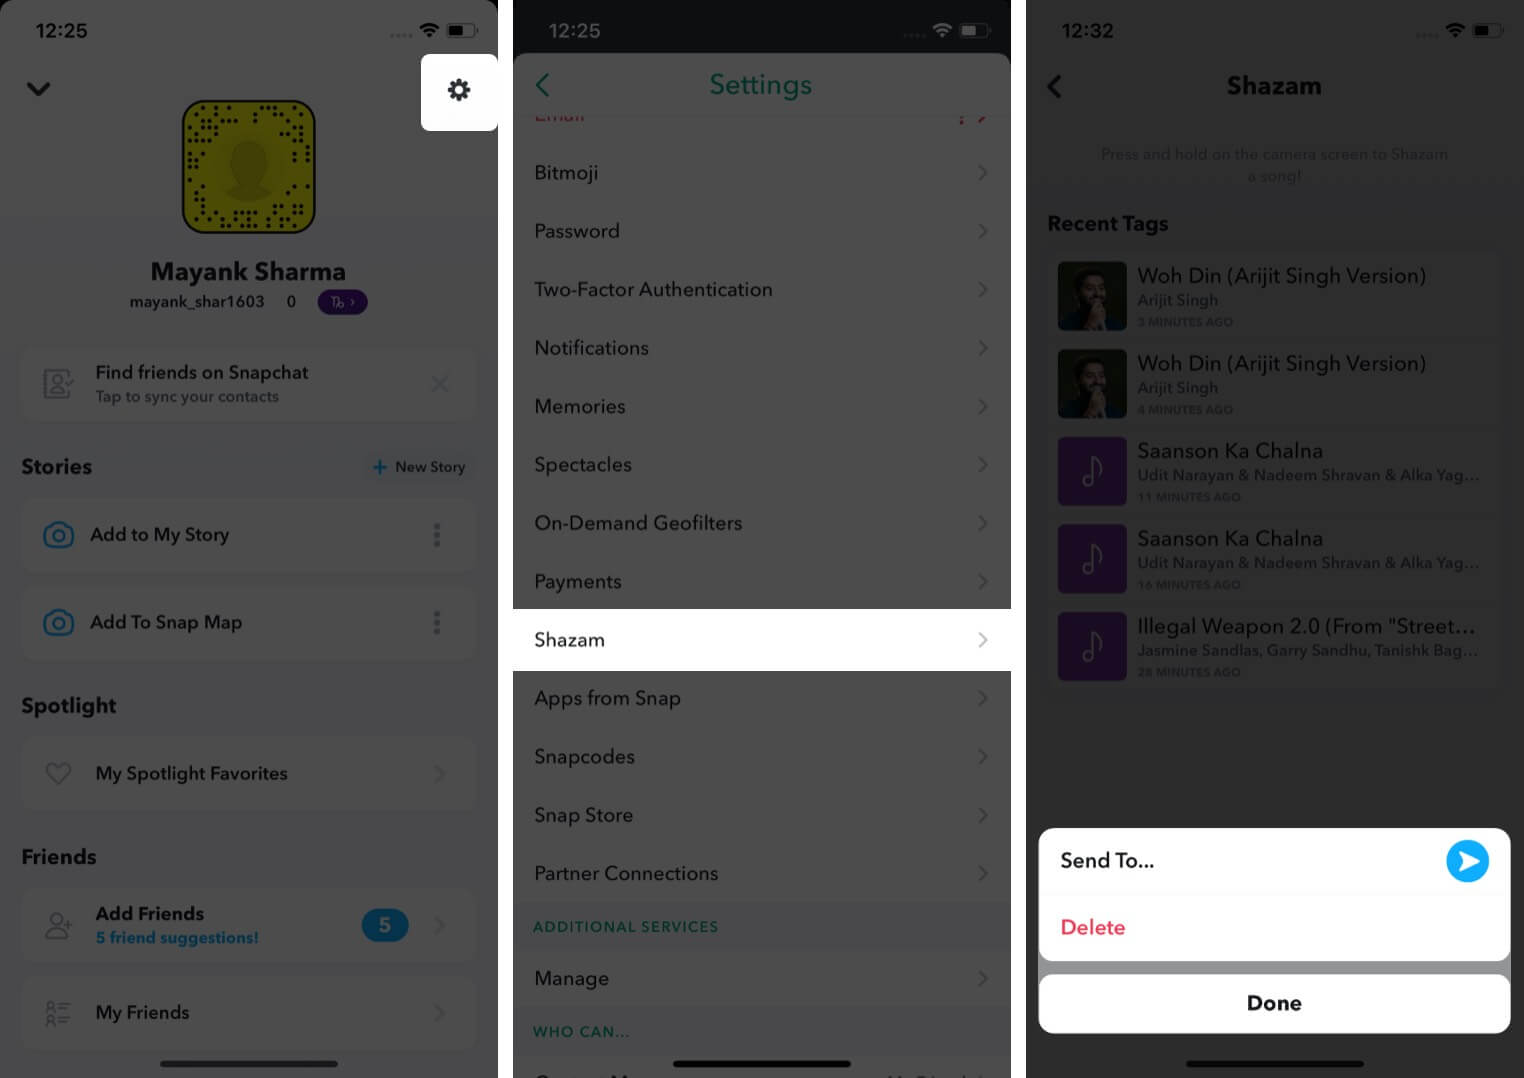 Find a list of your Shazam'd songs on Snapchat